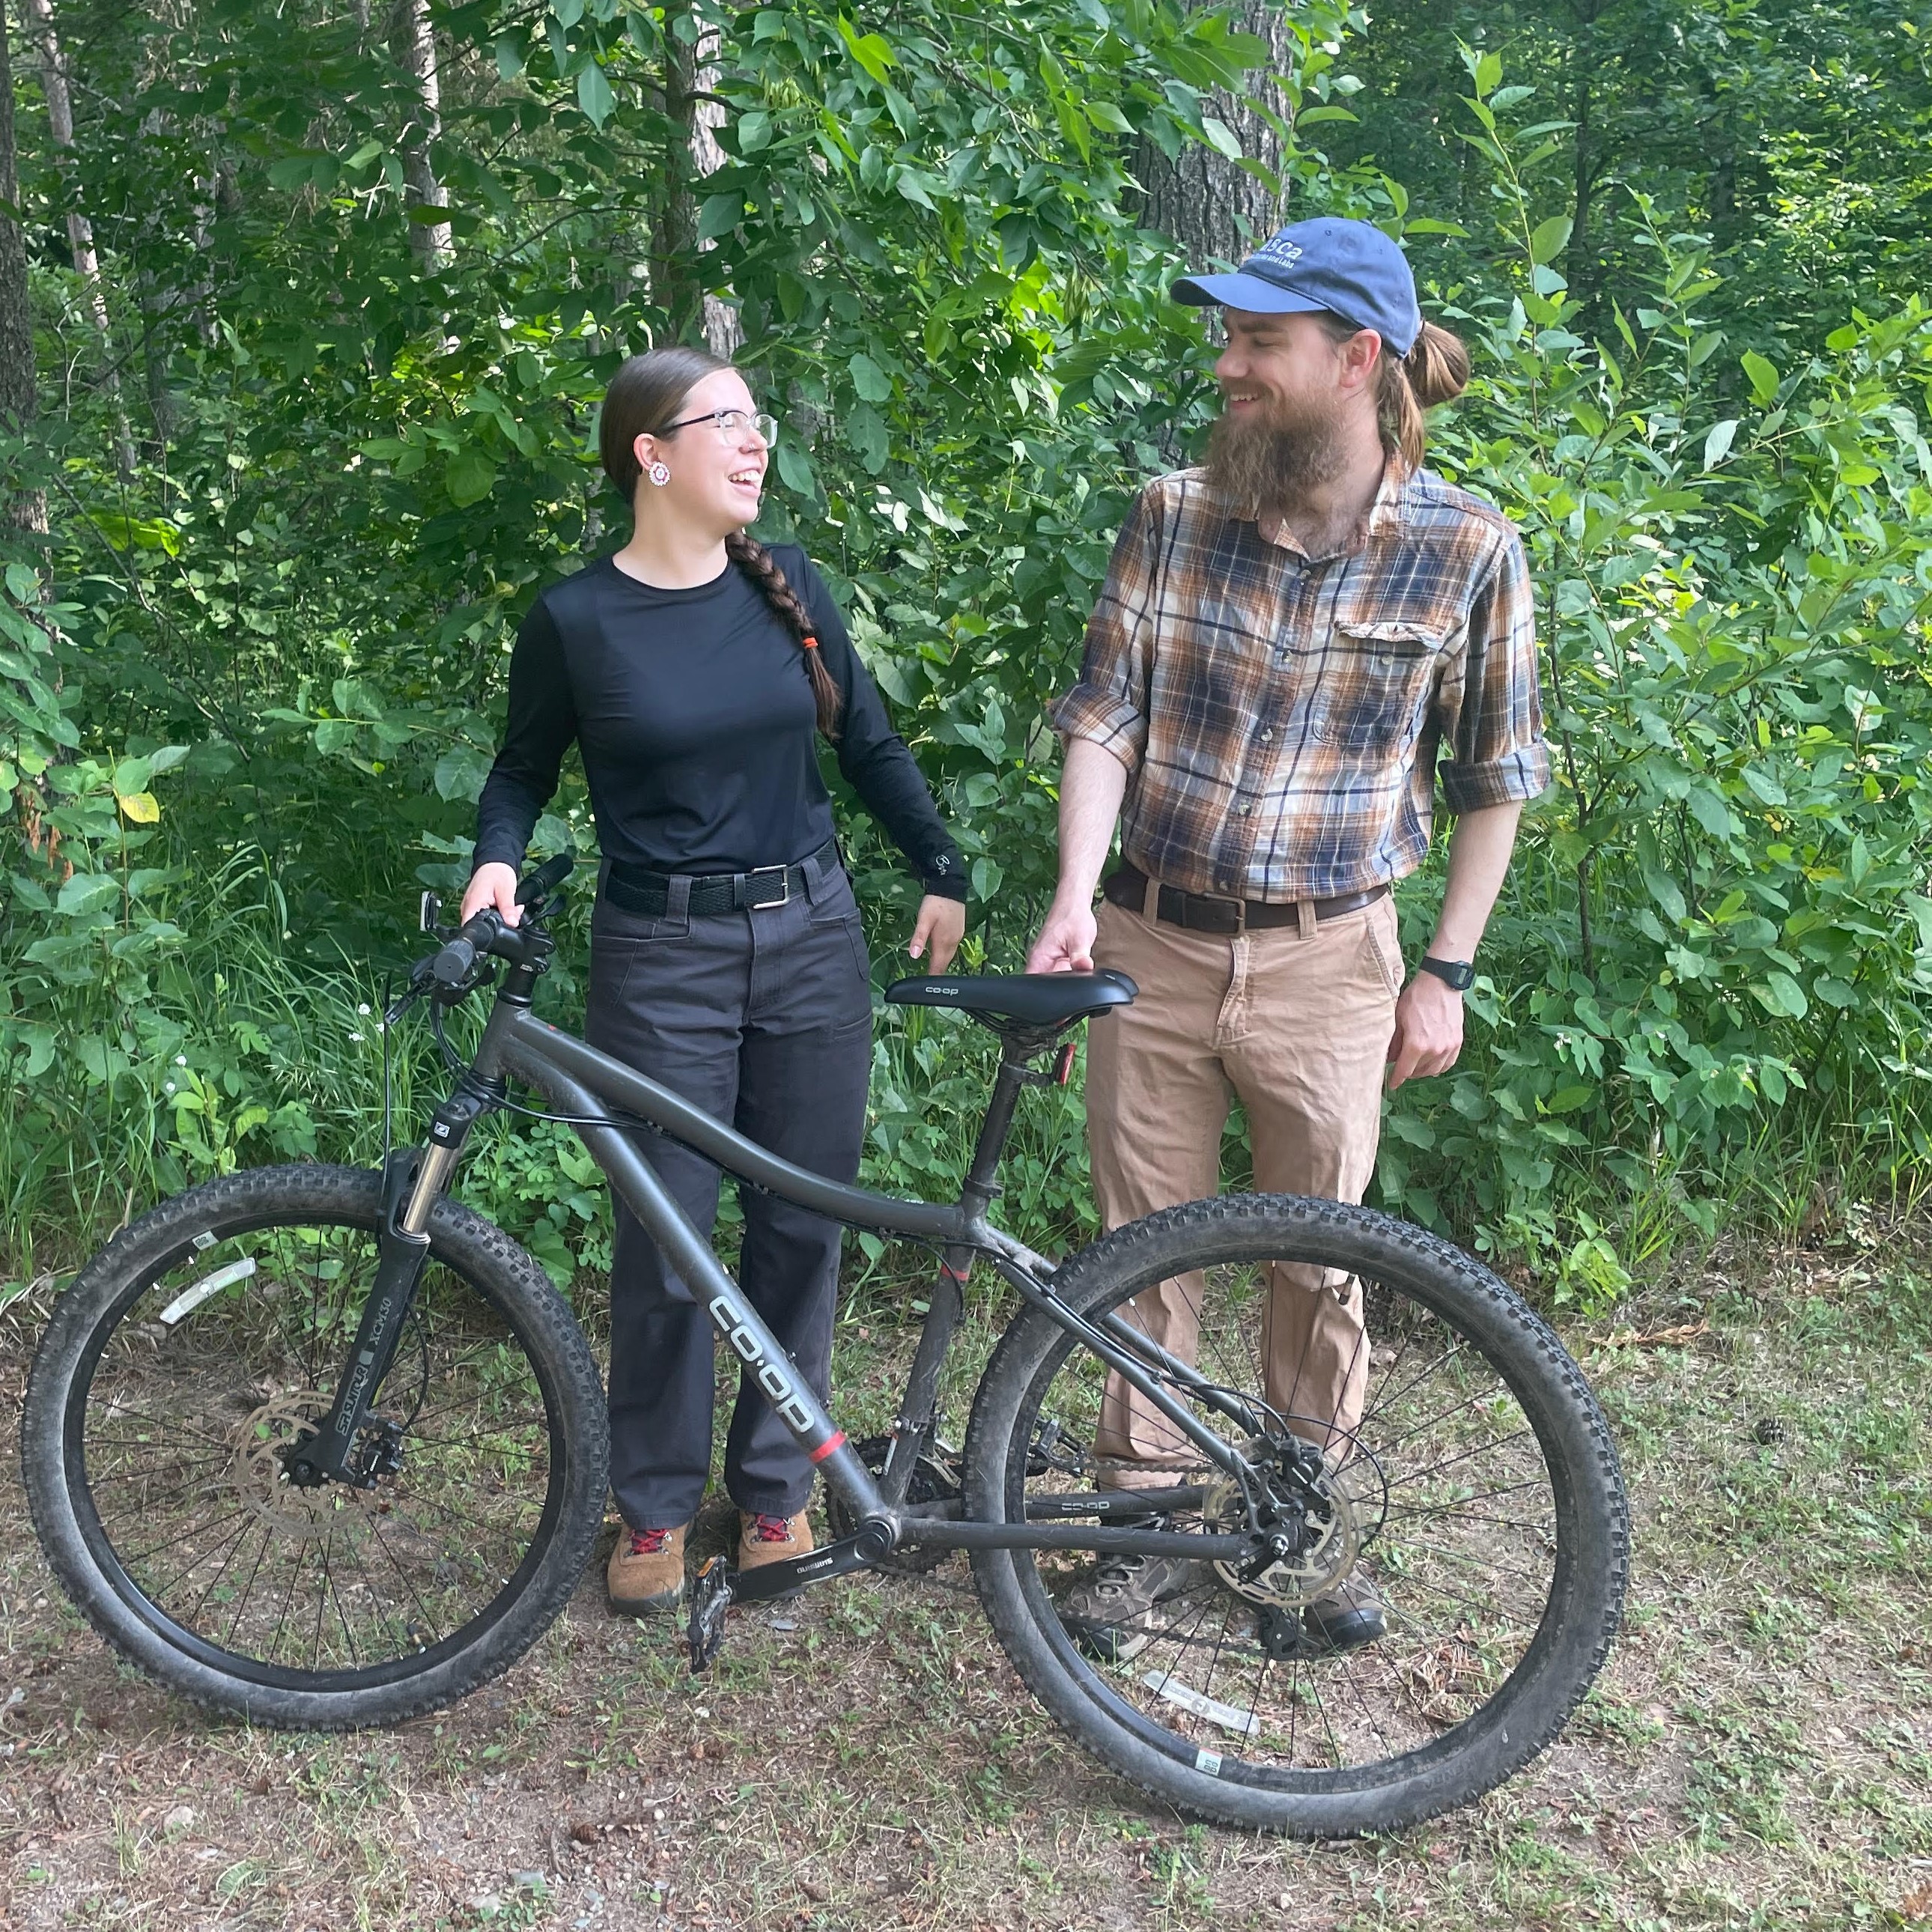 A woman in black holding up a bikeand man in plaid looking at each other and smiling.